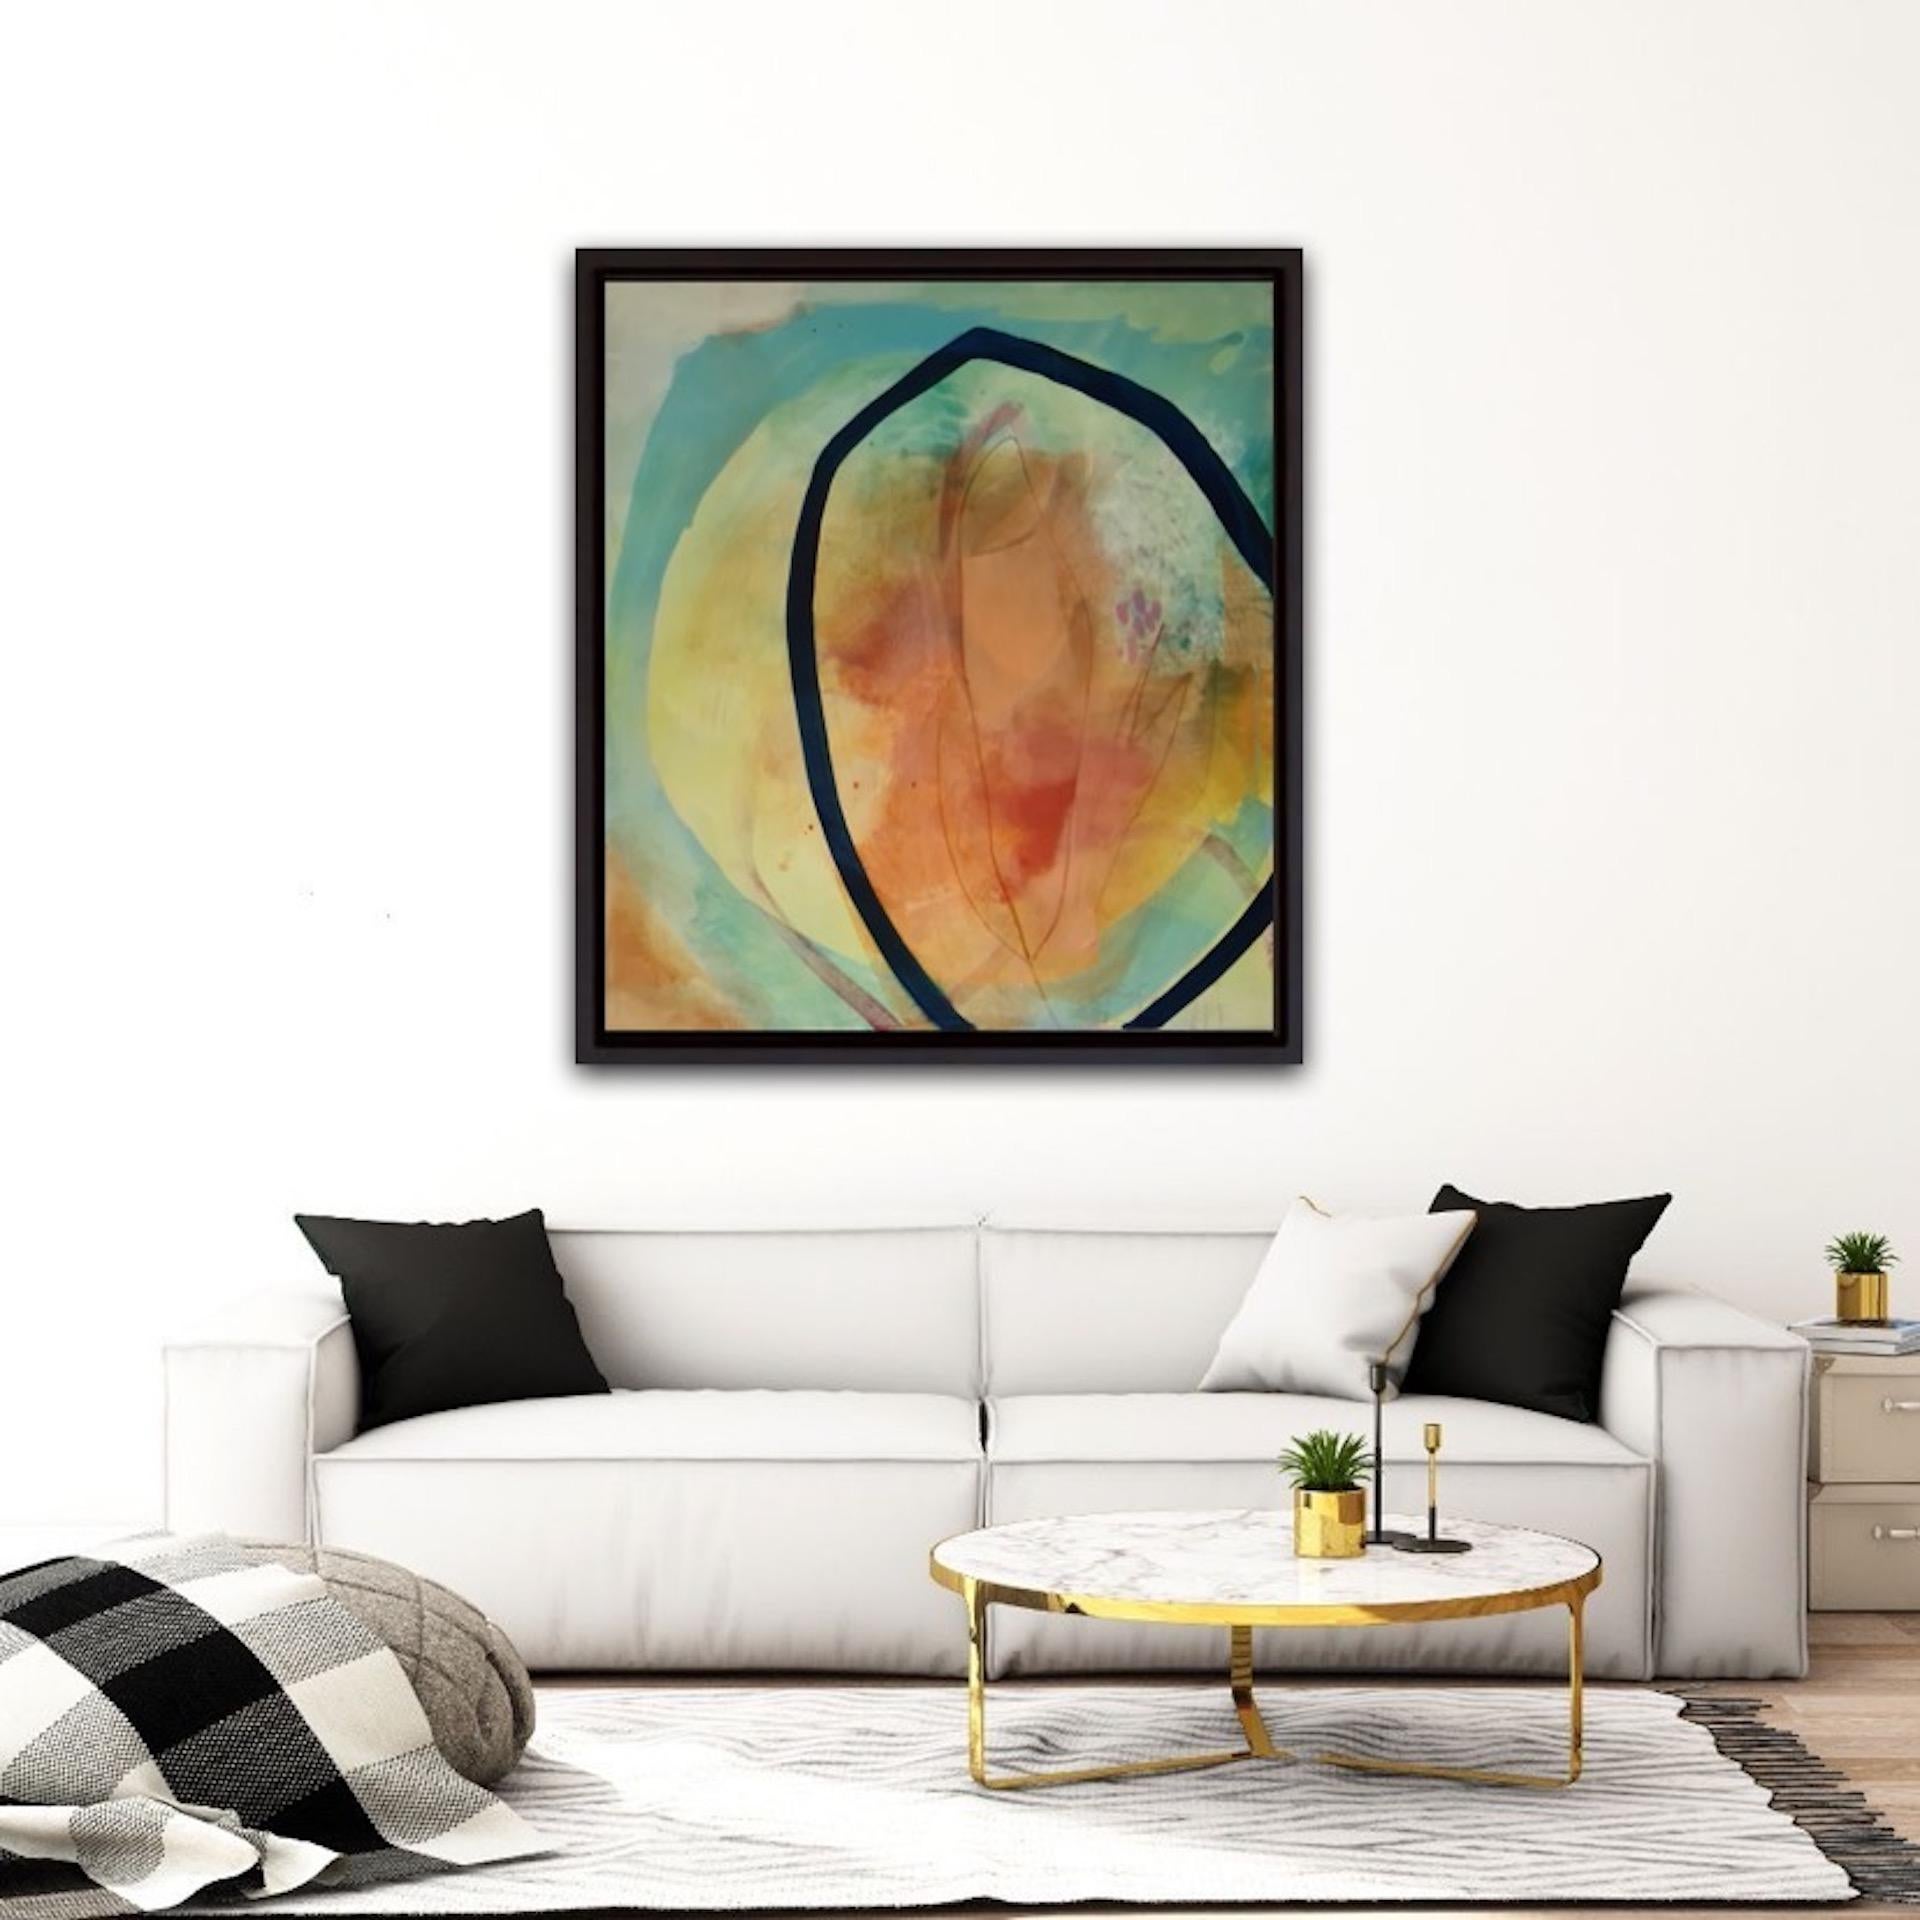 Claire Chandler
Feeling the Love
Original Abstract Painting
Image Size: H 95cm x W 85cm
Sold Unframed
(Please note that in situ images are purely an indication of how a piece may look).

I began this painting in March 2020 when we first went into